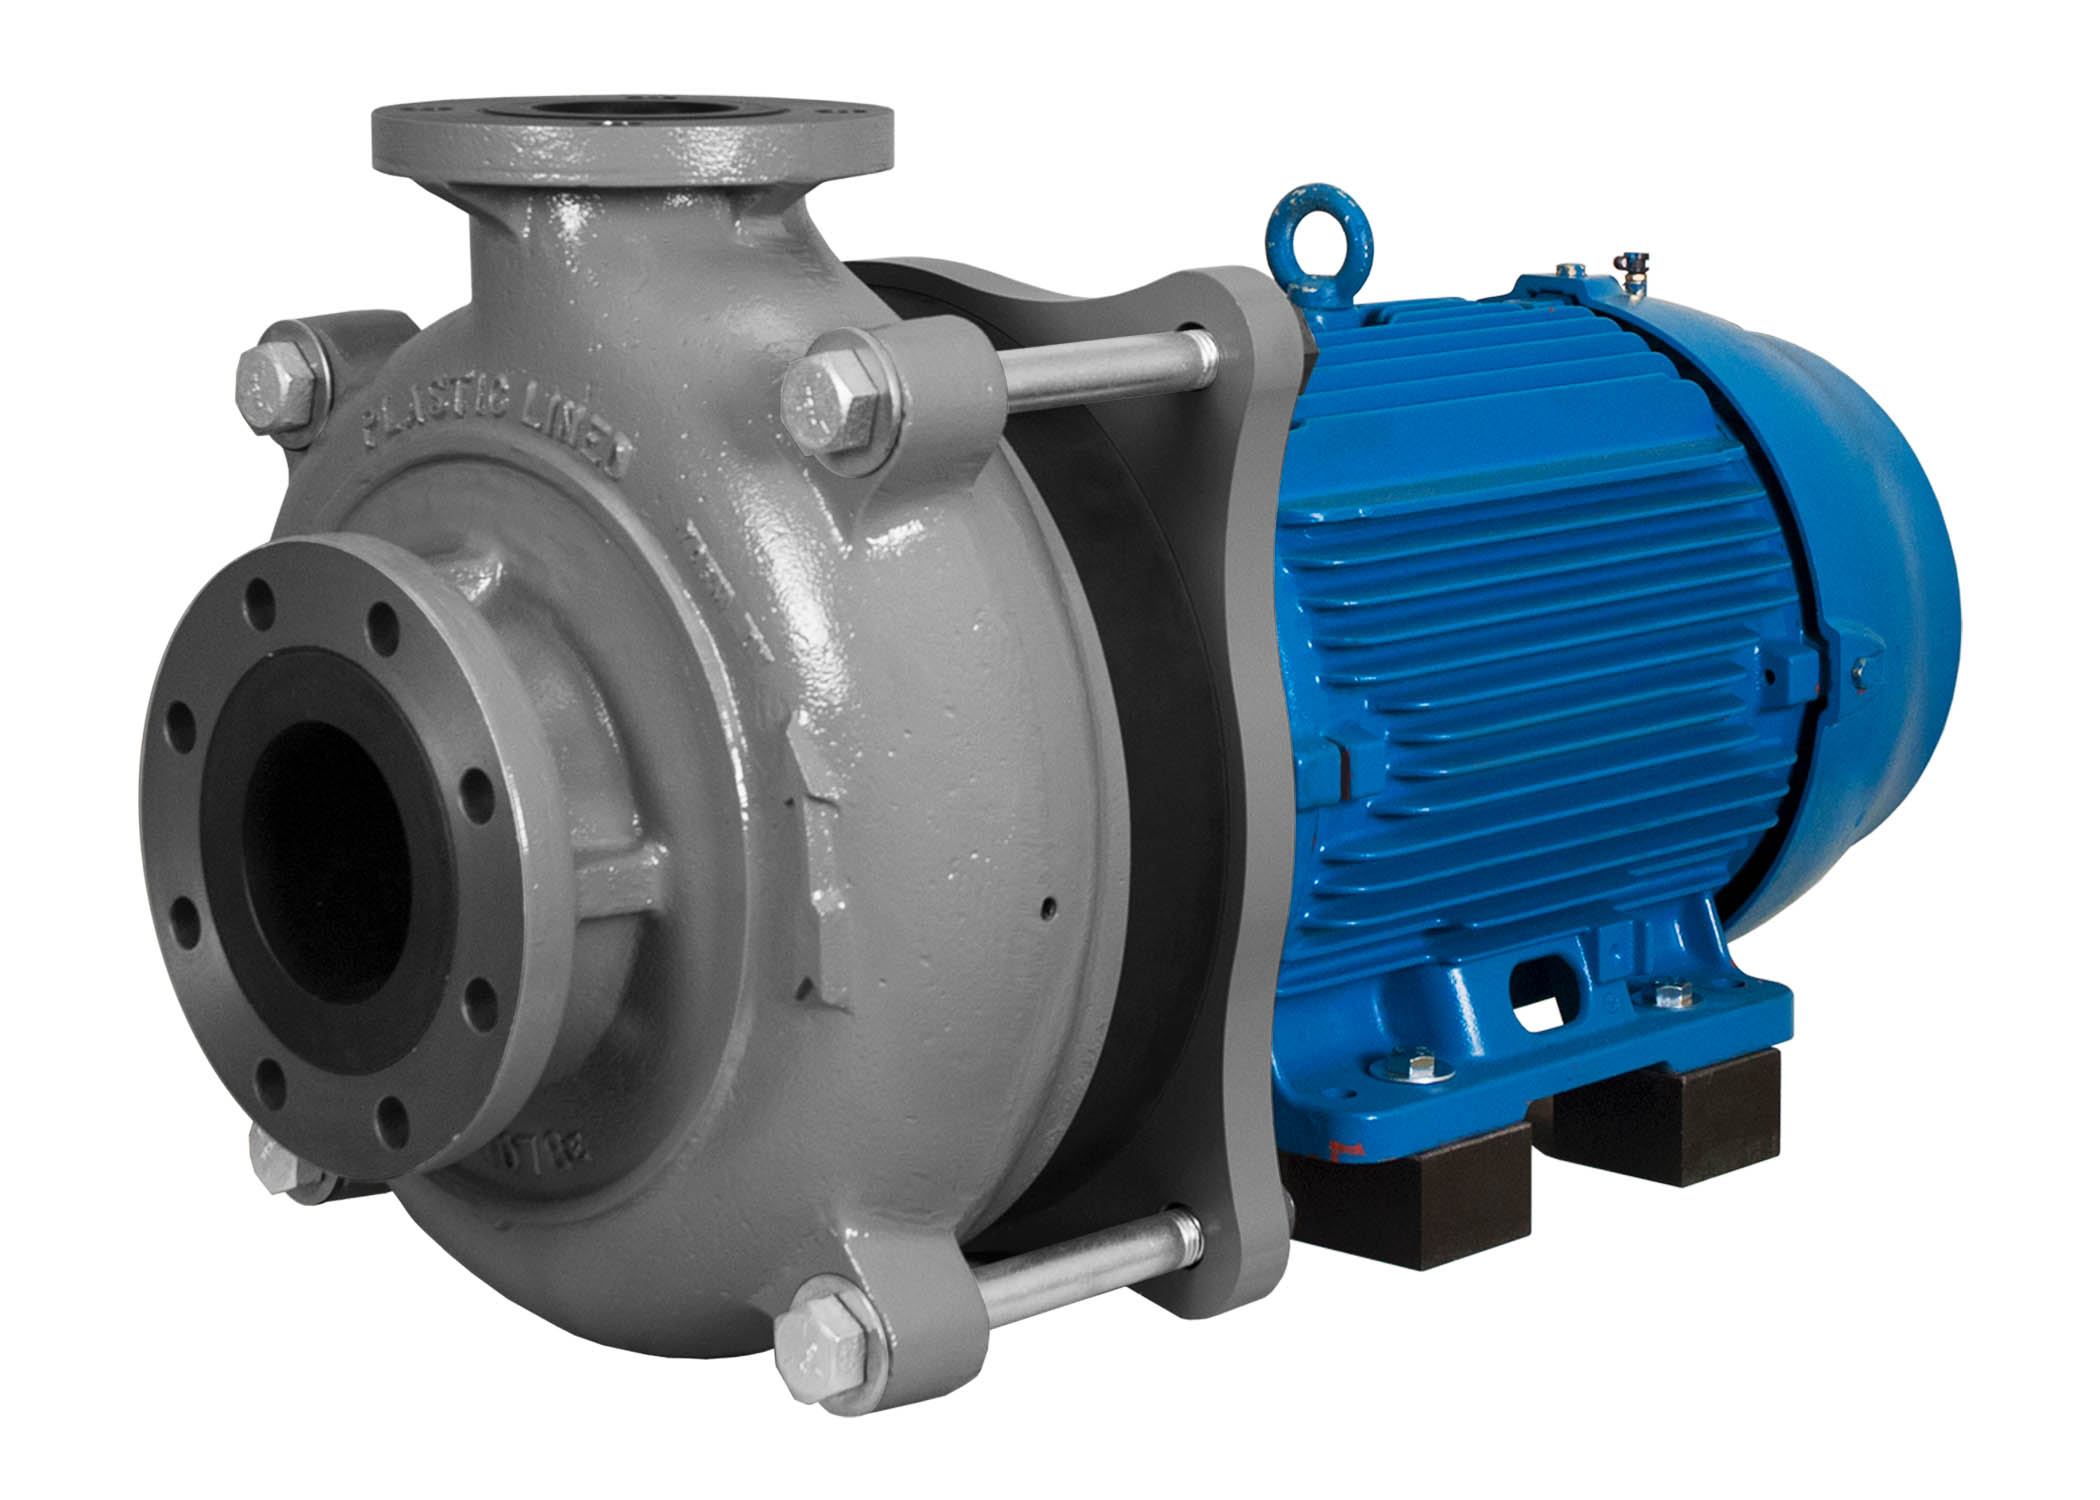 C-Shell 4x3-10 Pump with blue WEG Motor right angle view